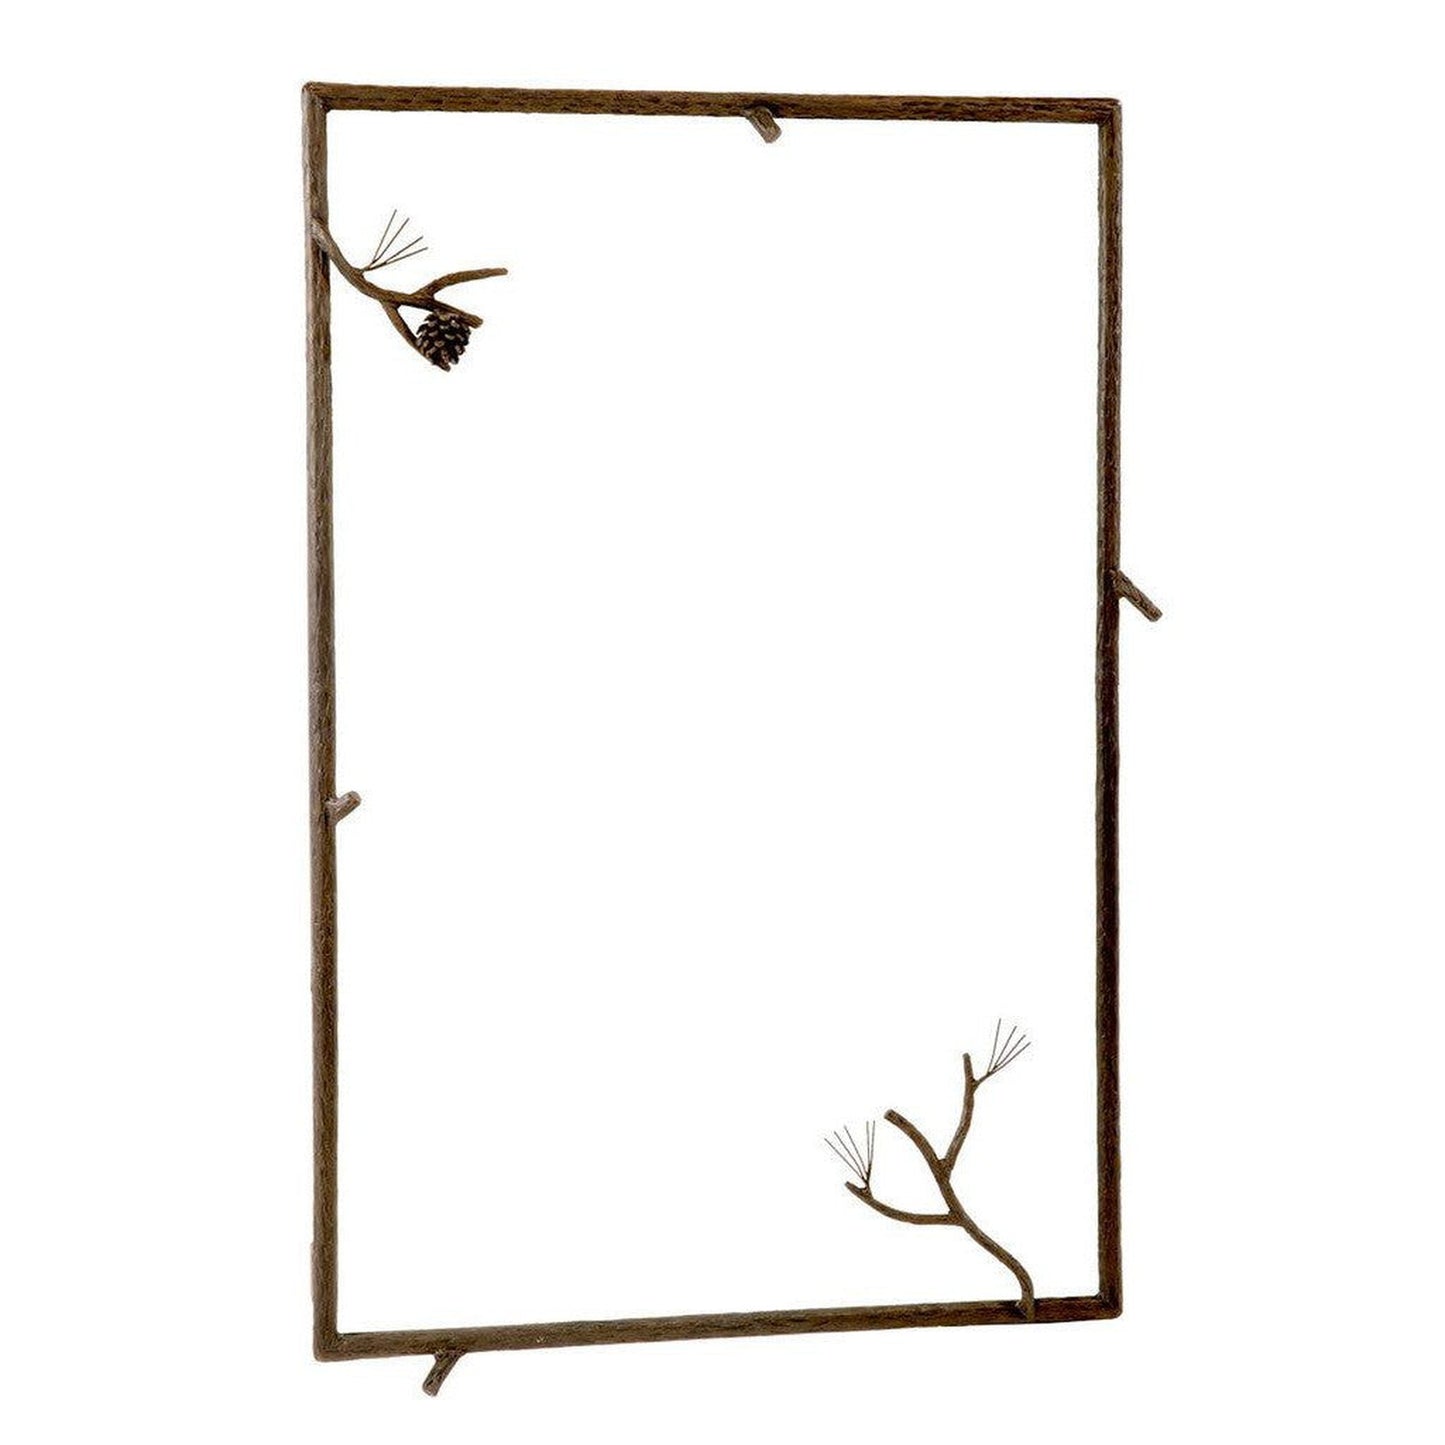 Stone County Ironworks Pine 25" x 21" Small Hand Rubbed Brass Iron Wall Mirror With Pewter Iron Accent